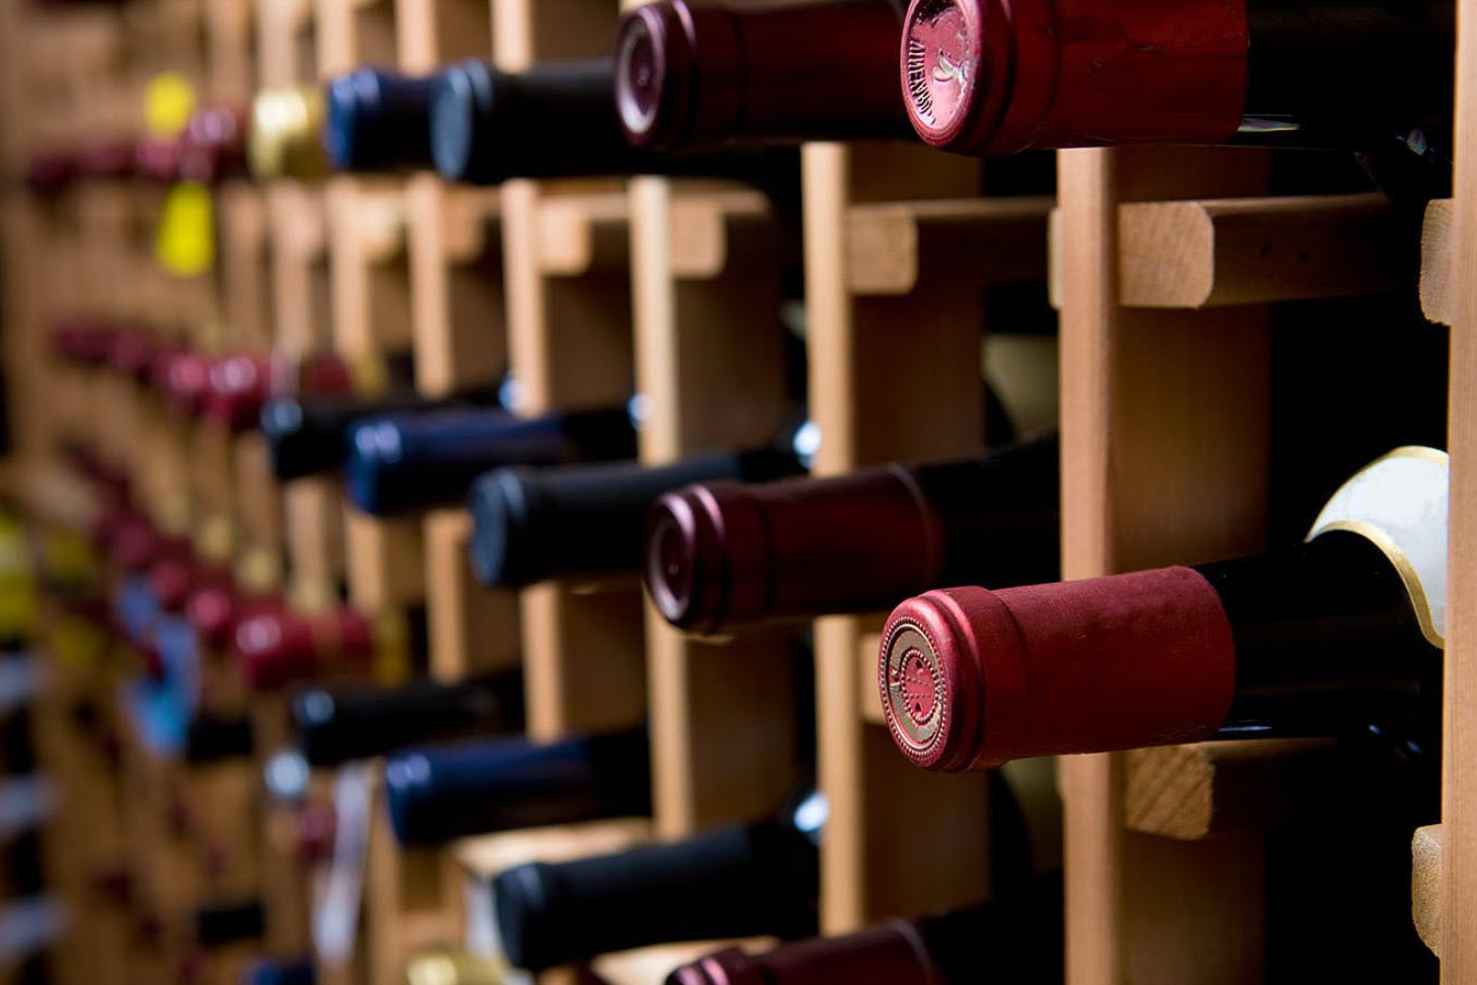 How long can I store Cabernet wine